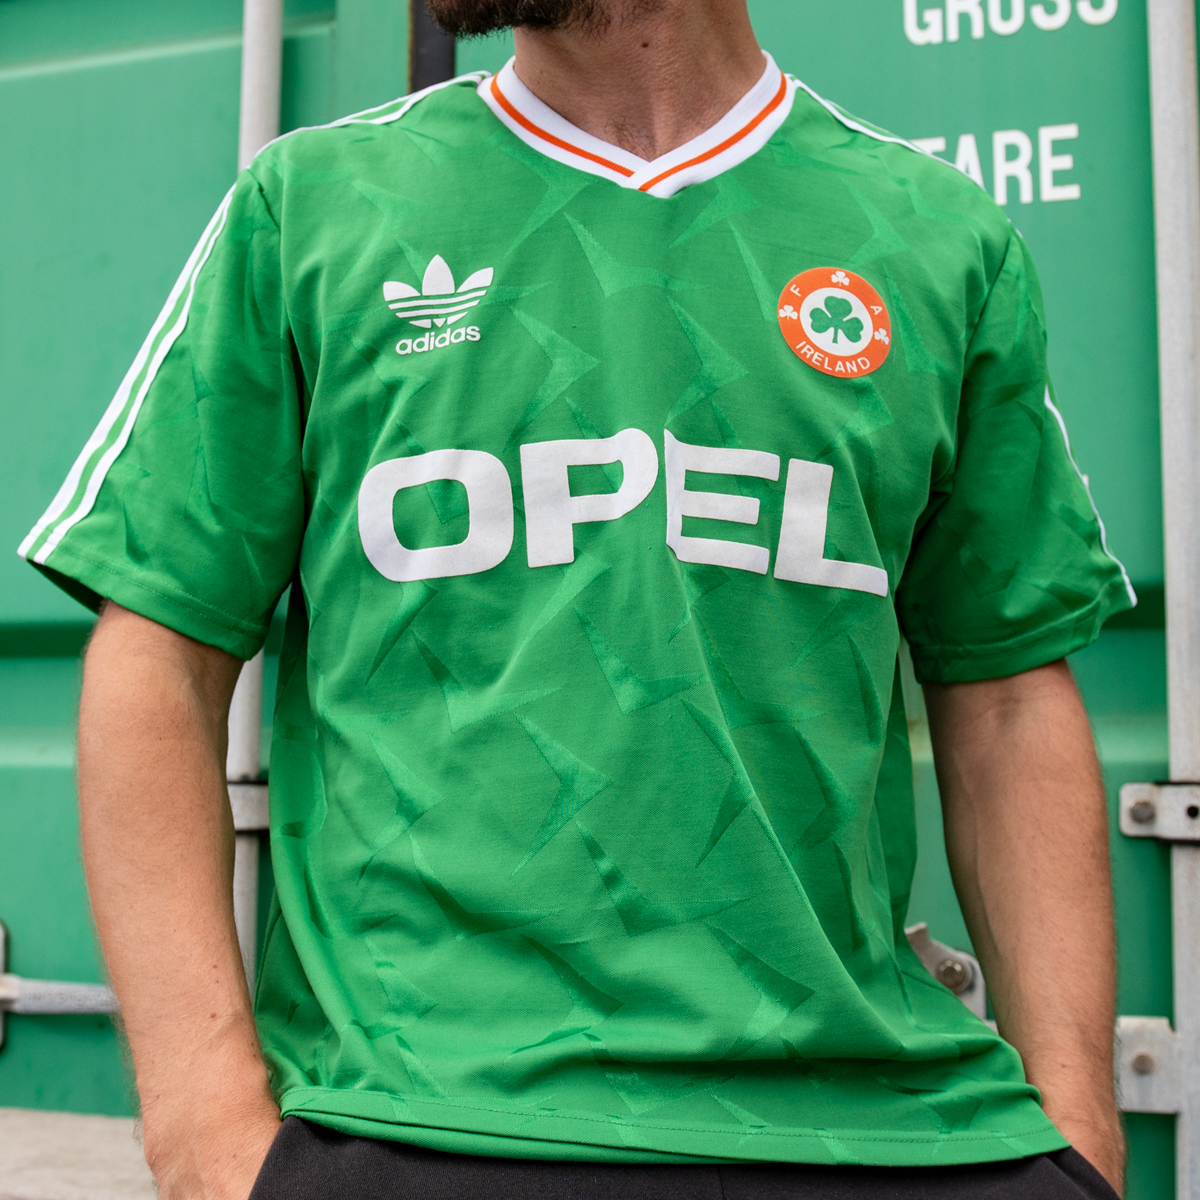 Classic Football Shirts on Twitter: "Ireland 1990 Home by Adidas 🇮🇪 Glorious home shirt worn at World Cup where they reached the Quarter Finals. Hitting the site on August 11th